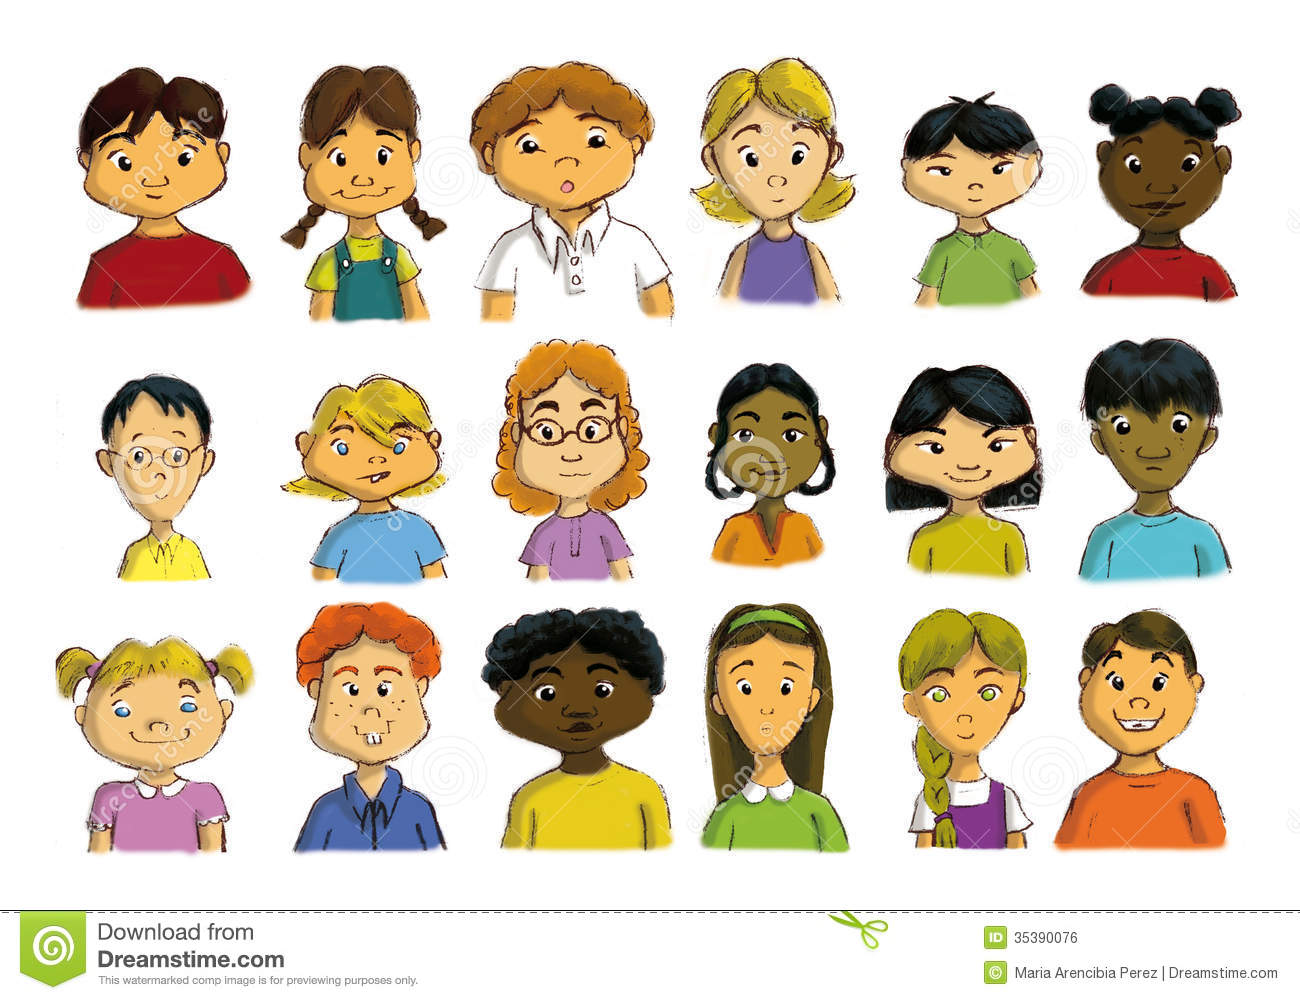 Multicultural Children Royalty Free Stock Image   Image  35390076